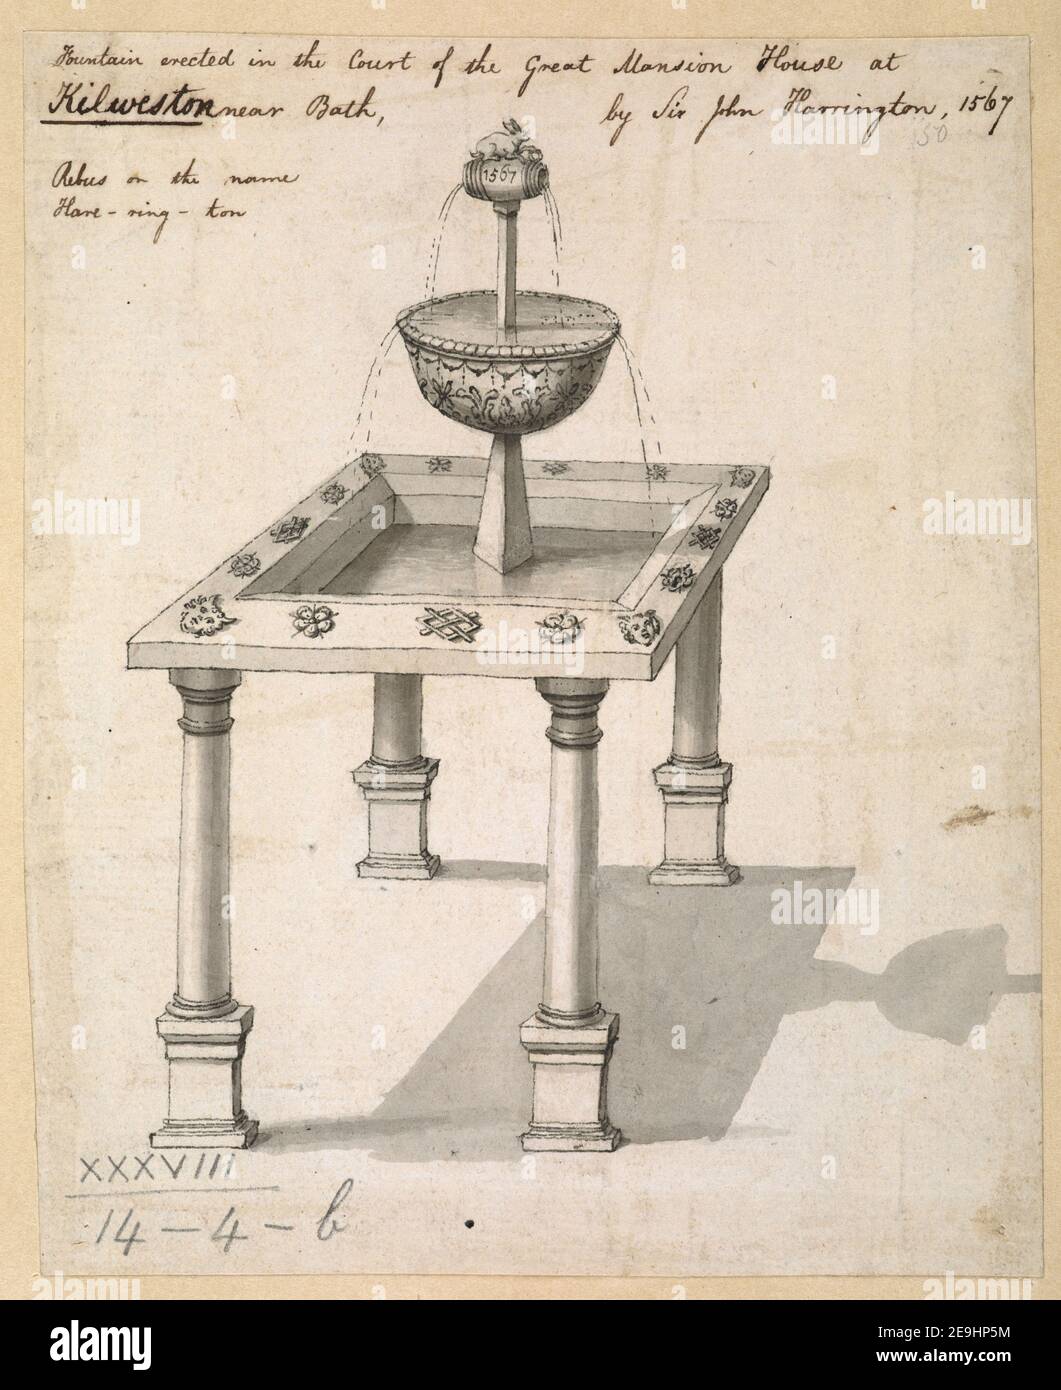 Fountain erected in the court of the Great Mansion House at Kilweston near  Bath, by Sir John Harrington, 1567. Visual Material information: Title:  Fountain erected in the court of the Great Mansion